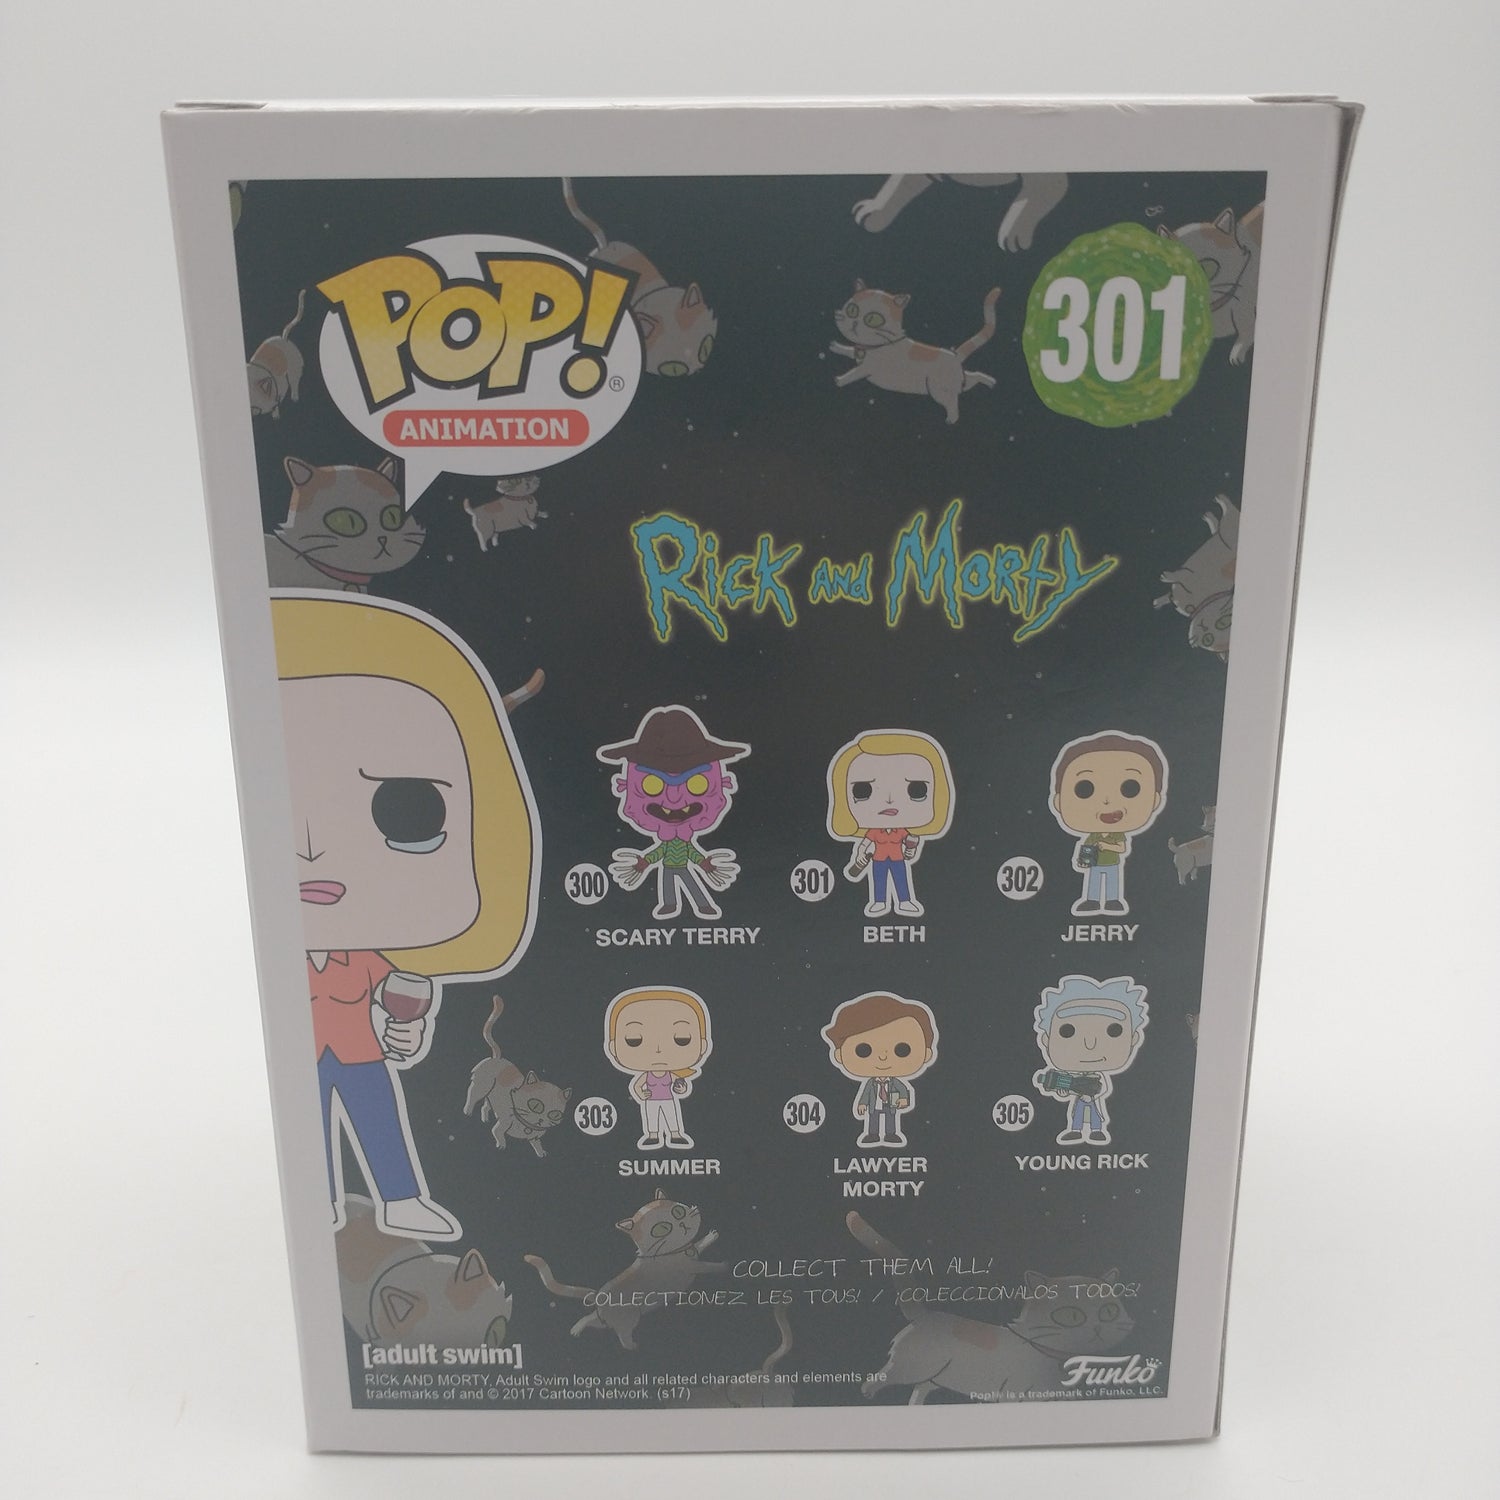  A picture of the back of the card featuring pictures of other action figures available along with various playsets available for purchase. 